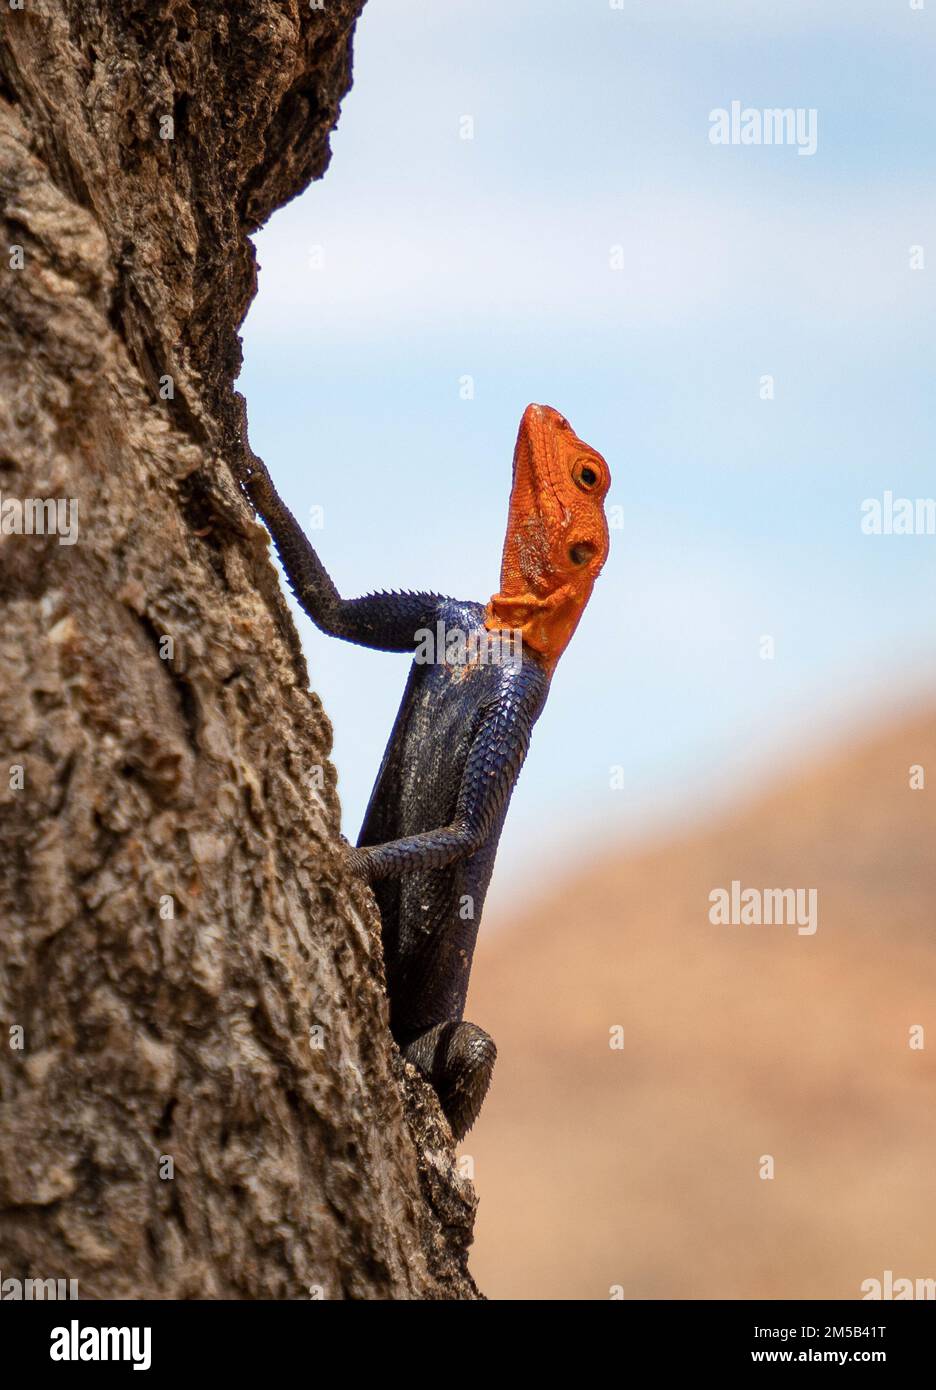 Male Namib rock agama ,a species of agamid lizard that is native to granite rocky outcrops in northwestern Namibia Stock Photo